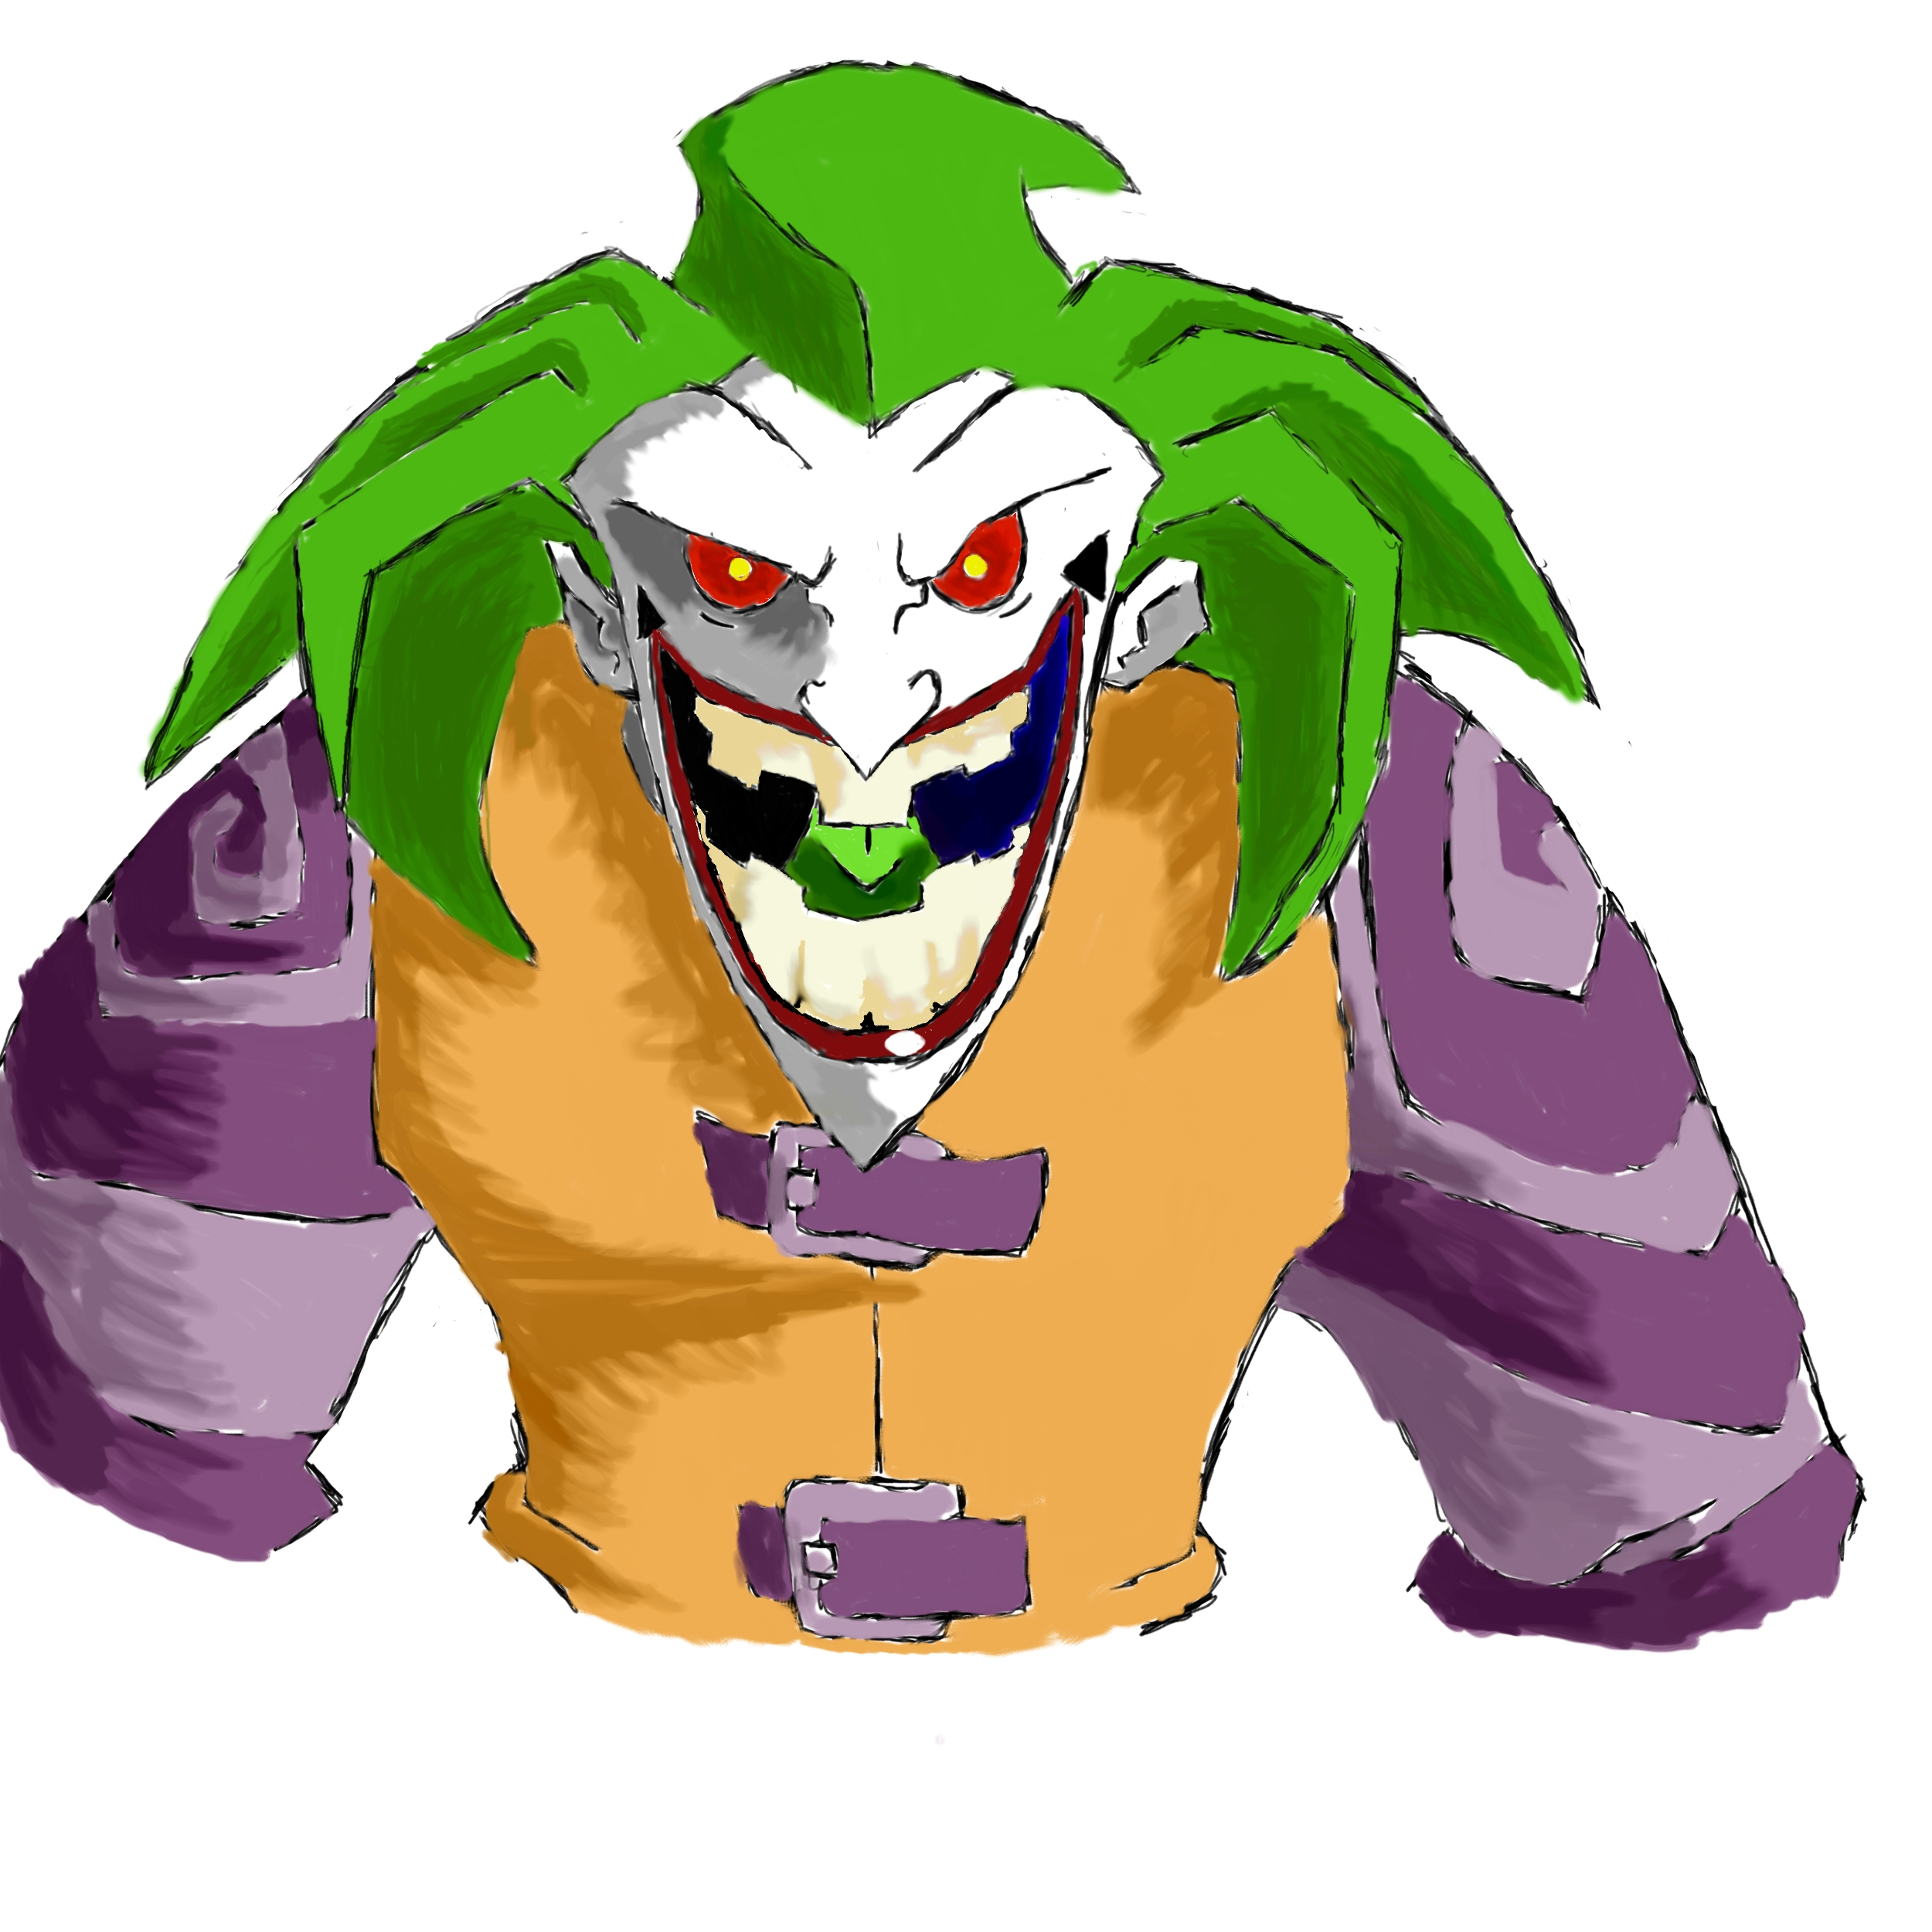 29 Cartoon Joker Face Images PNG Animated Image 81075 | Hot Sex Picture